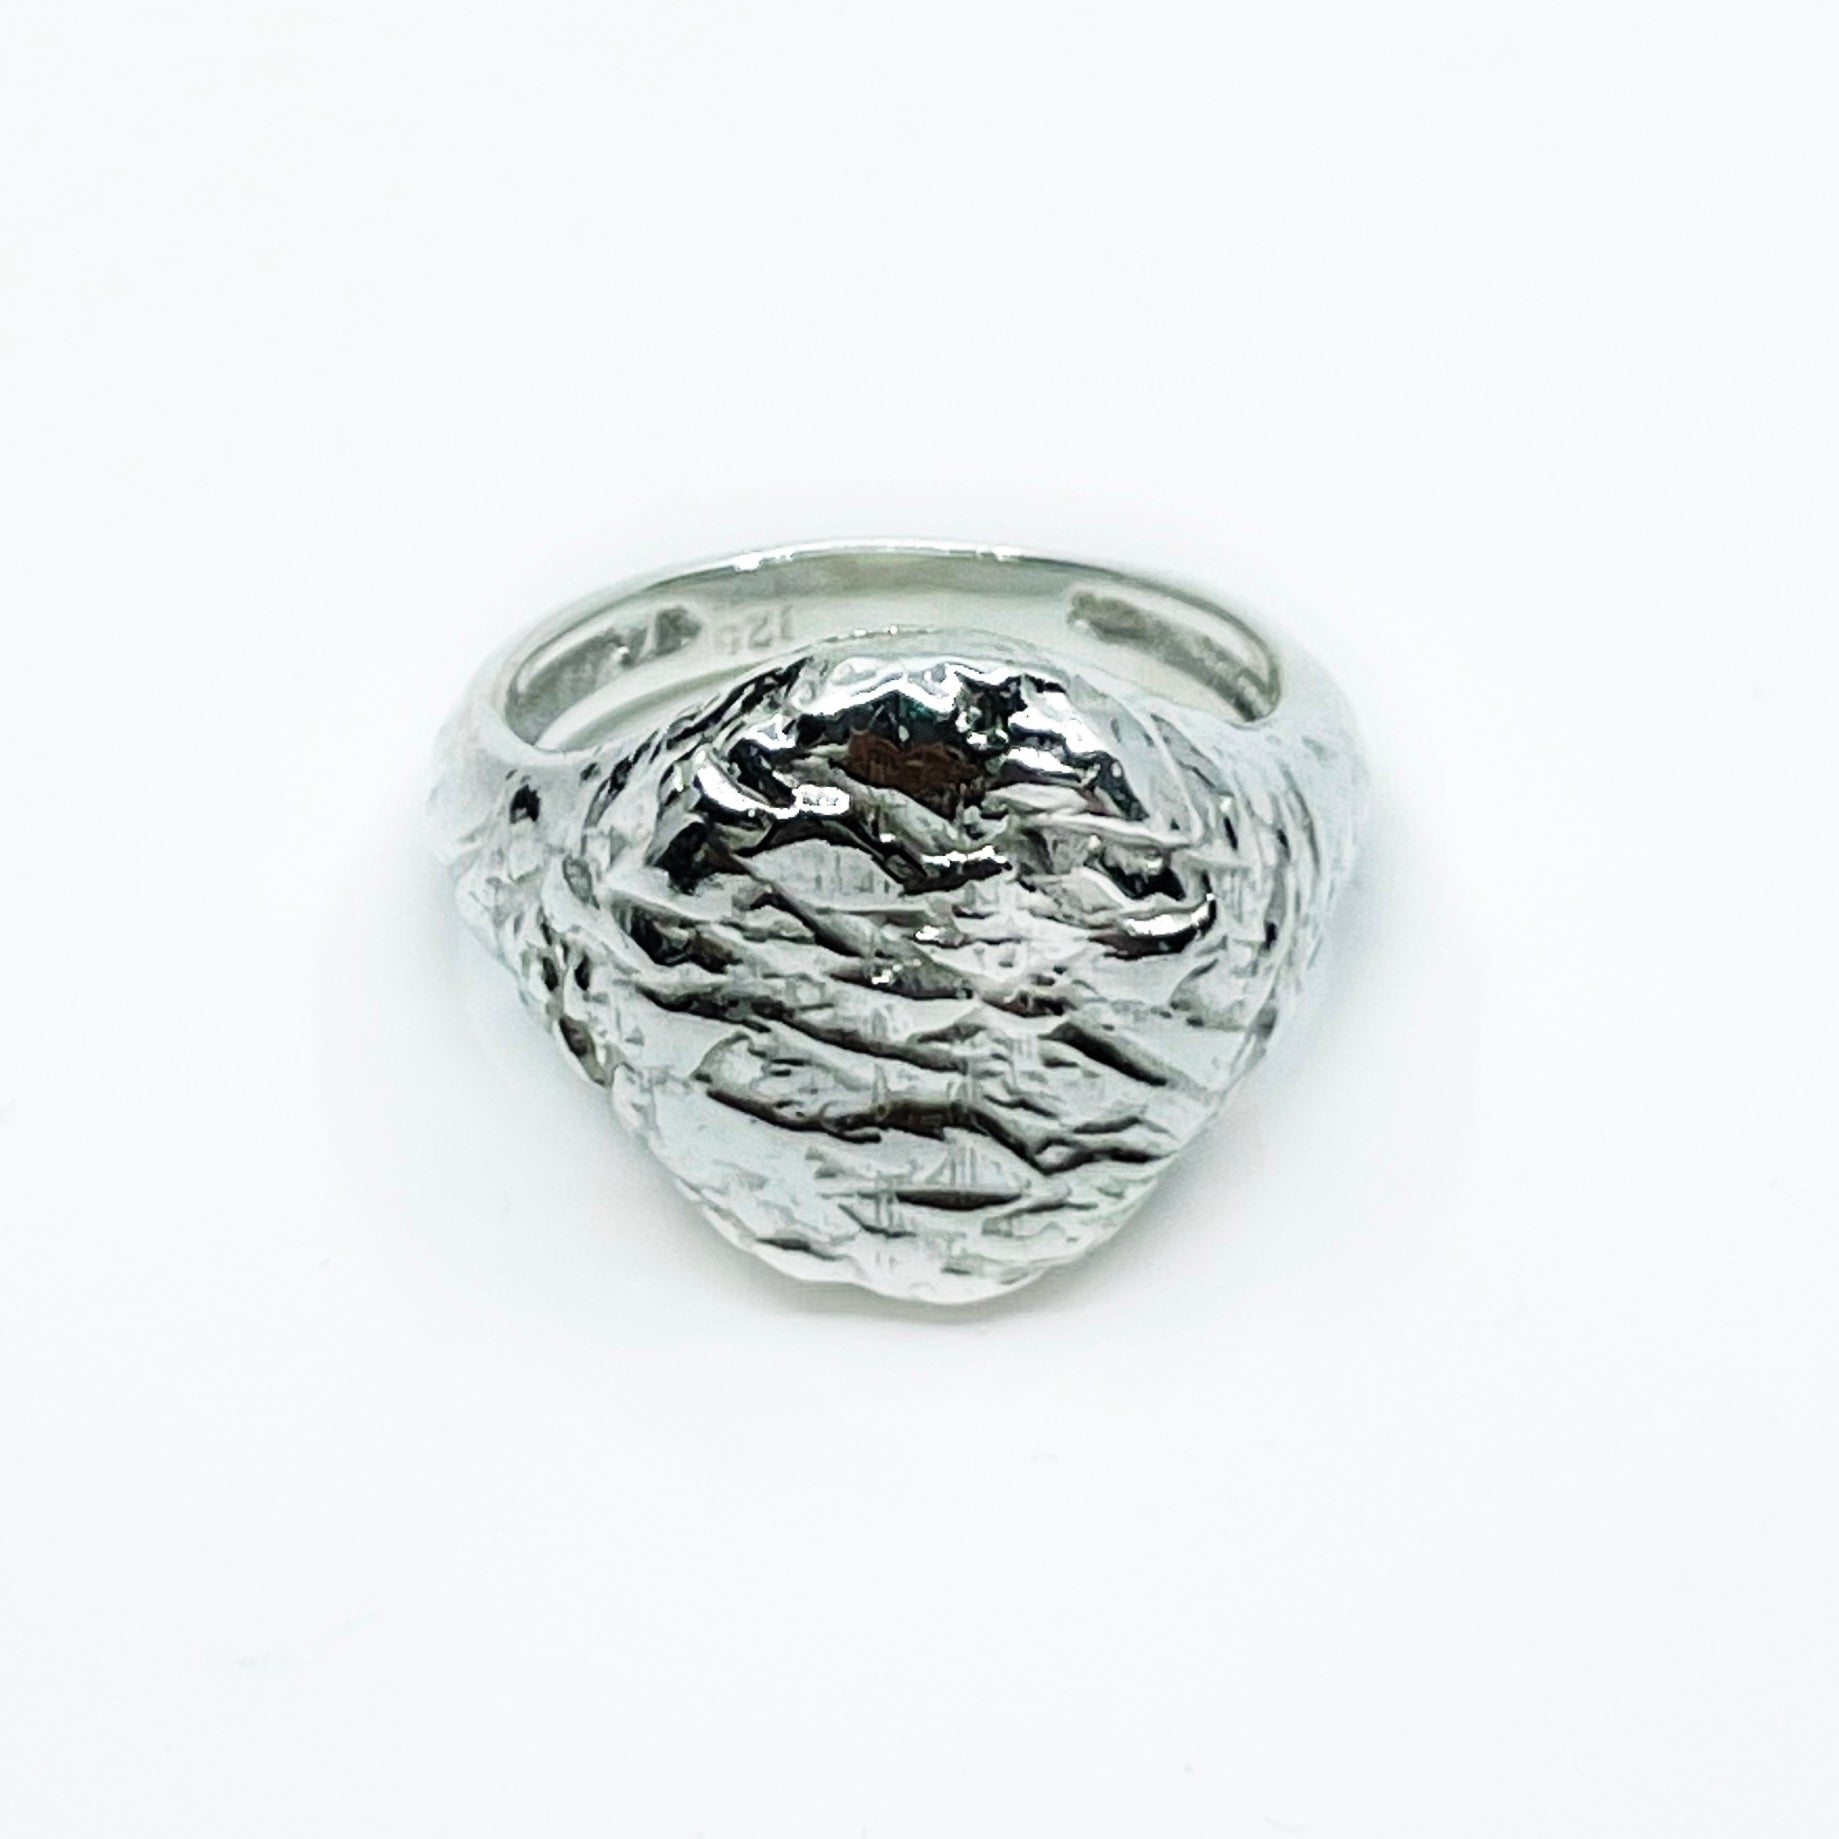 SHATTERED OVAL RING